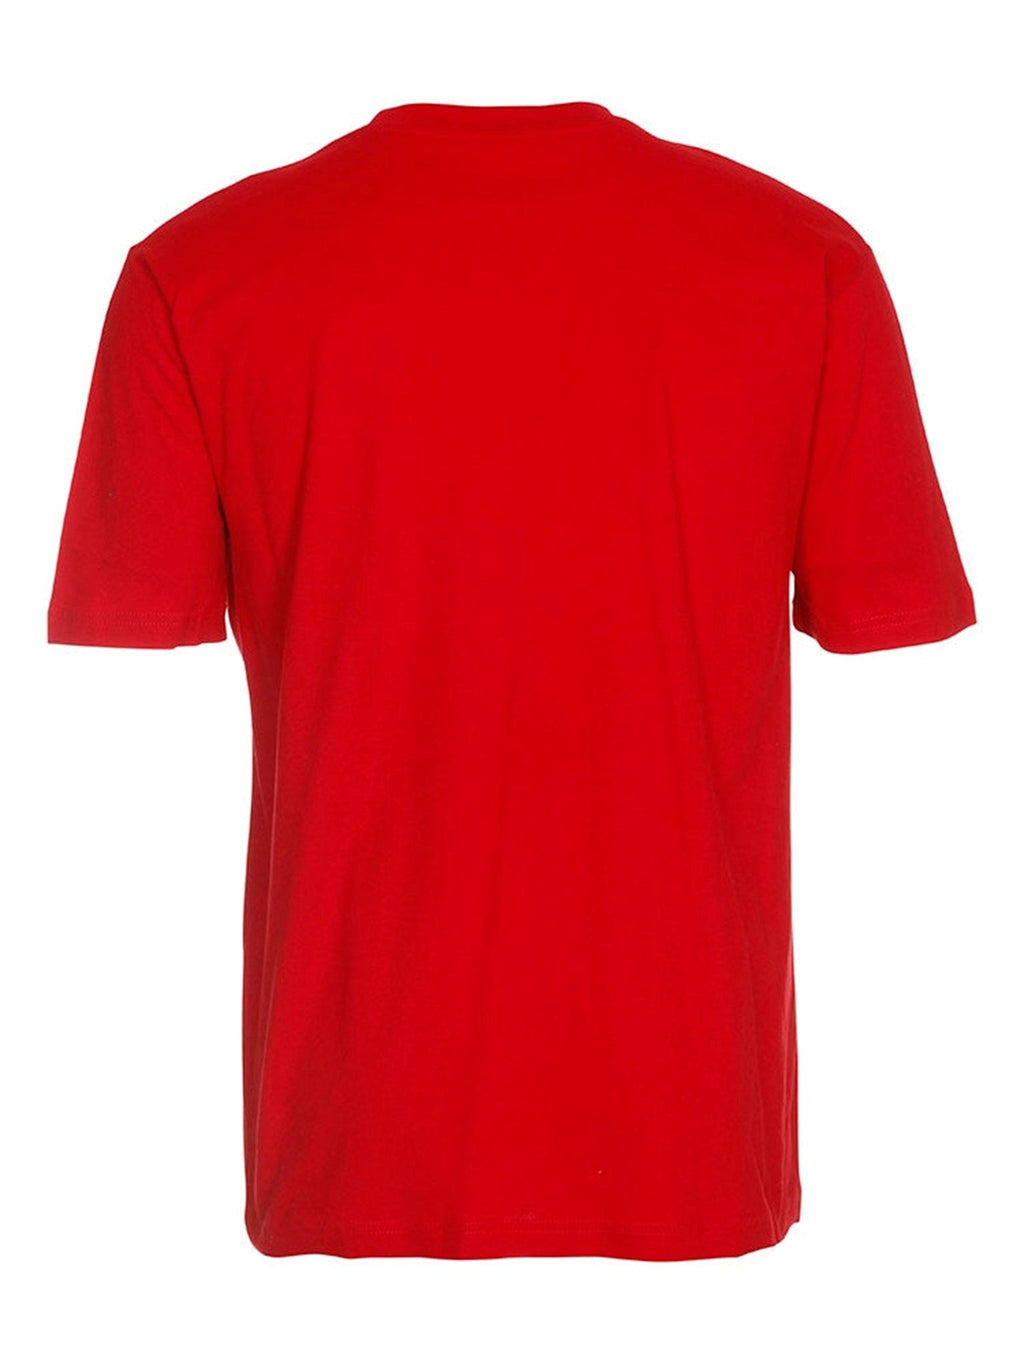 Oversized t-shirt - Red